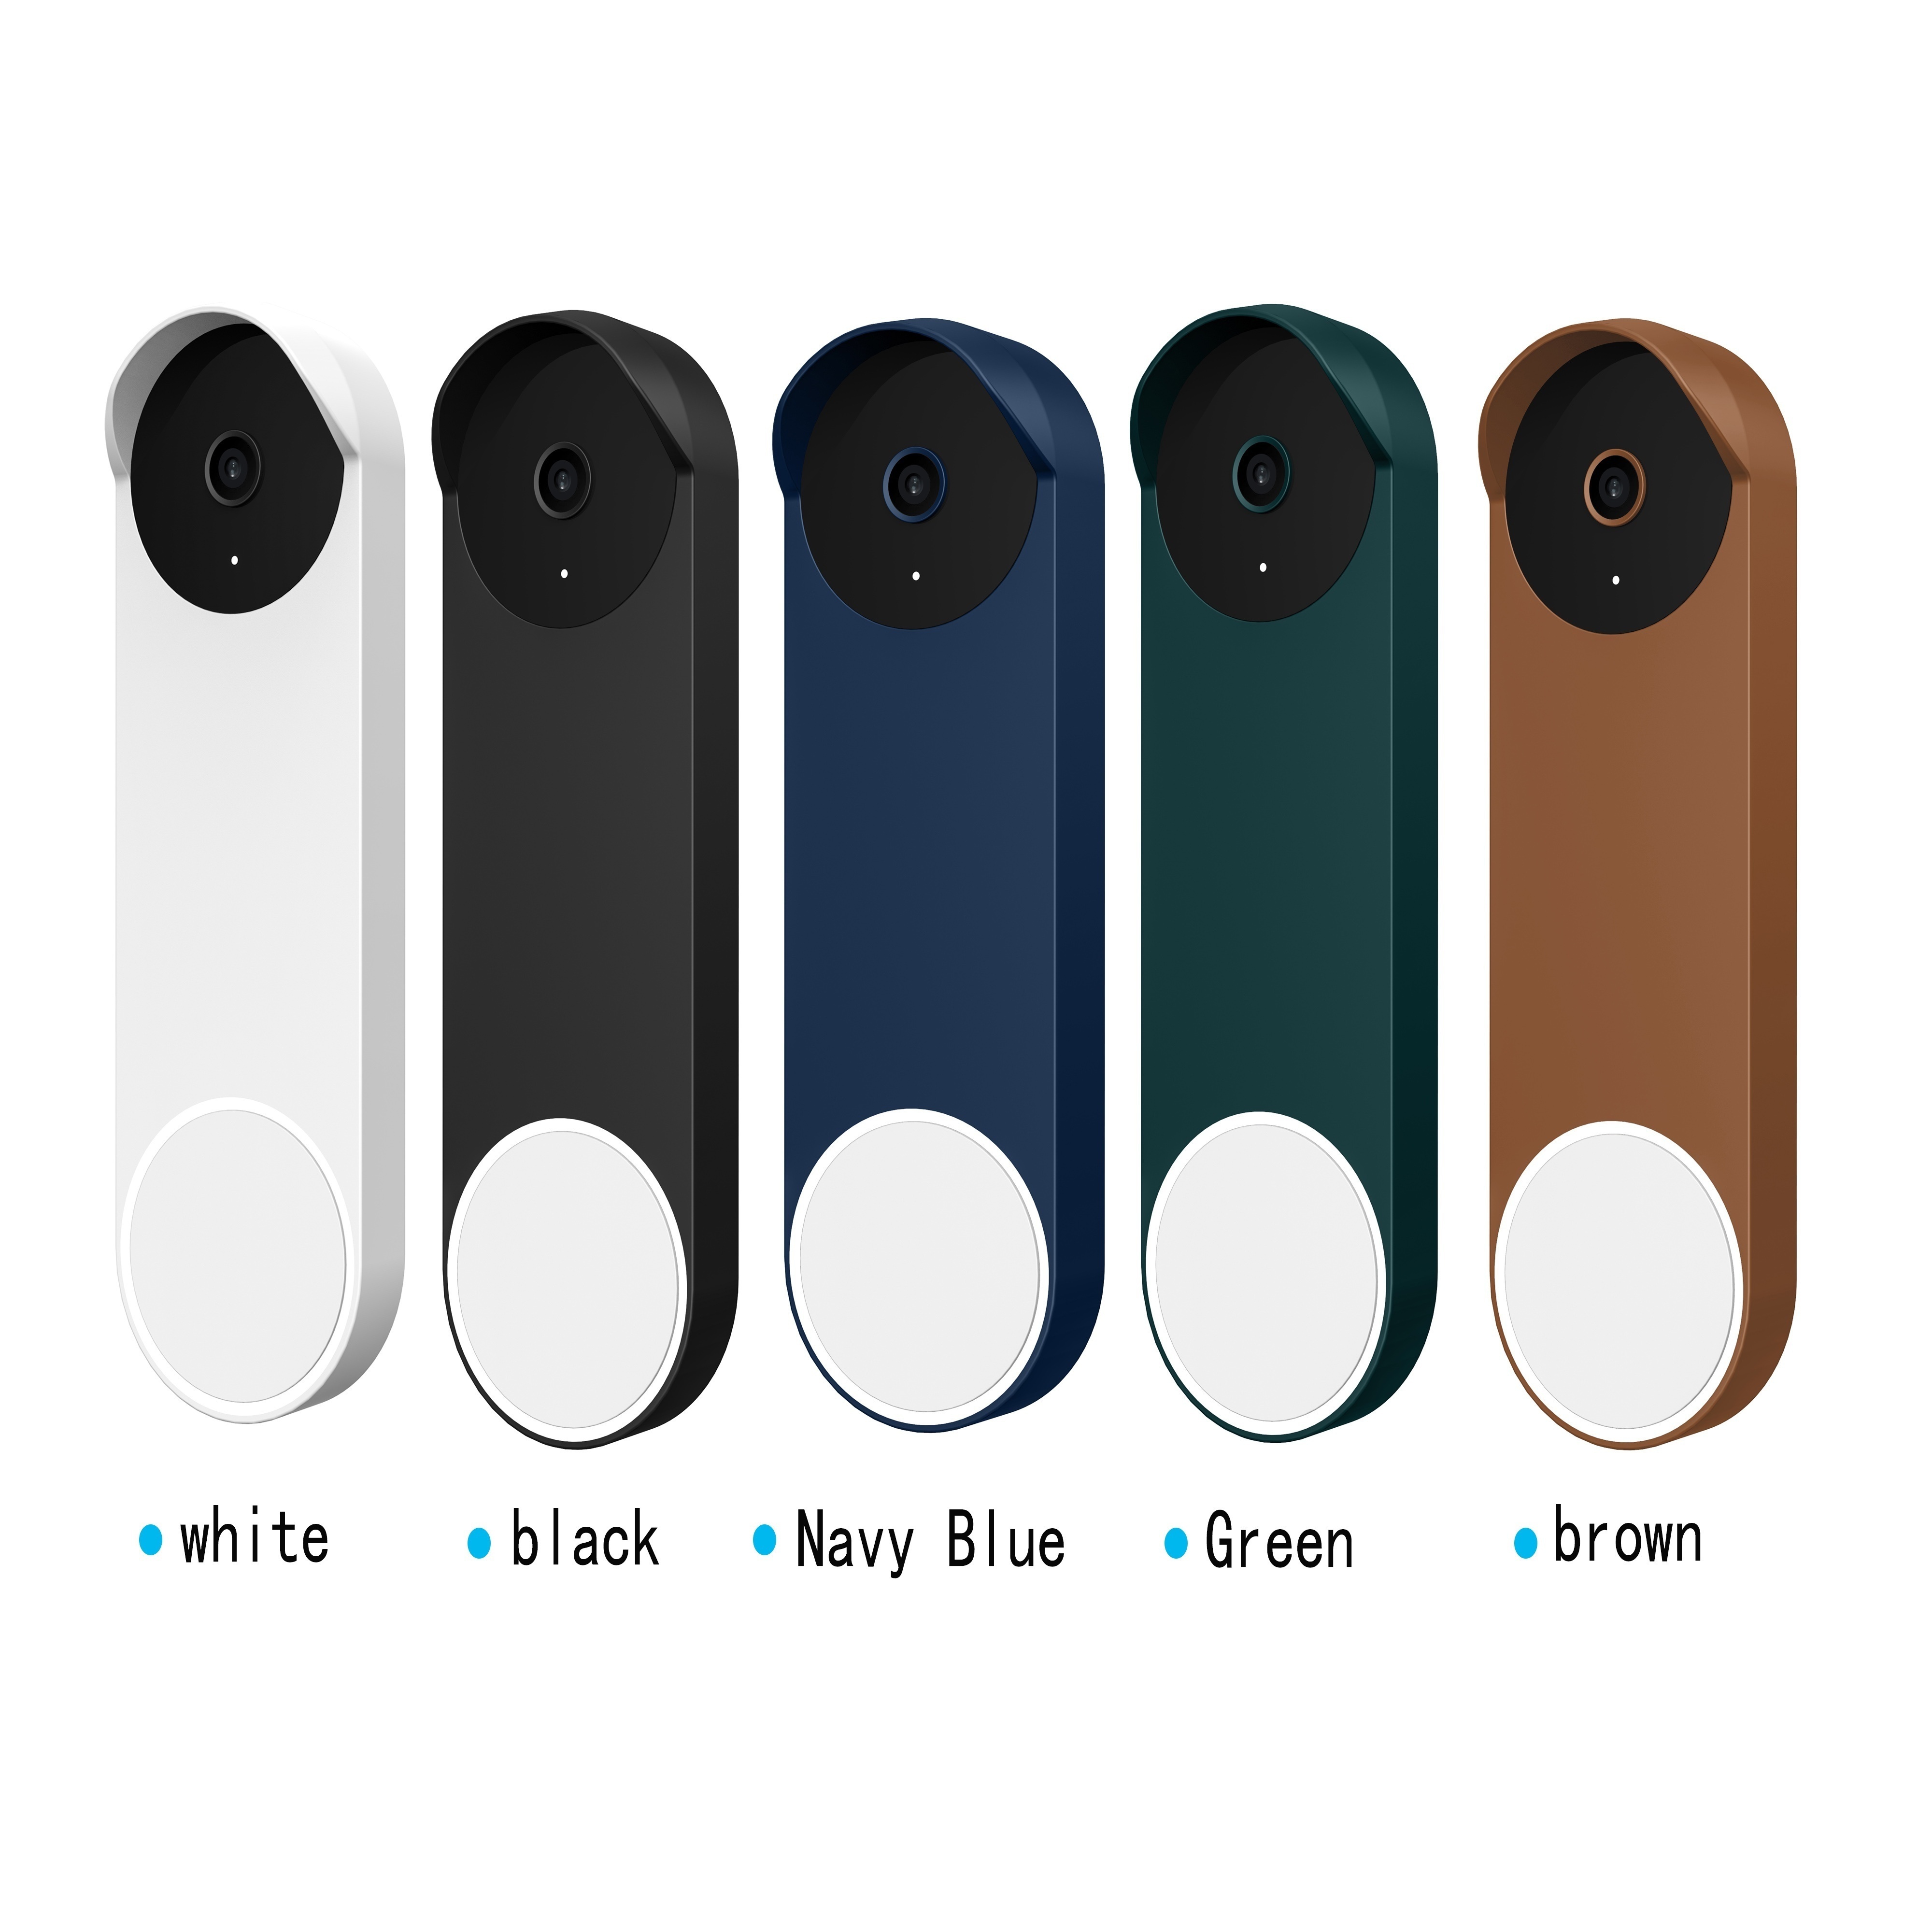 suitable for google nest doorbell battery 2021 doorbell silicone protective cover sun protection snow protection seismic resistance silicone shell waterproof and dustproof cover